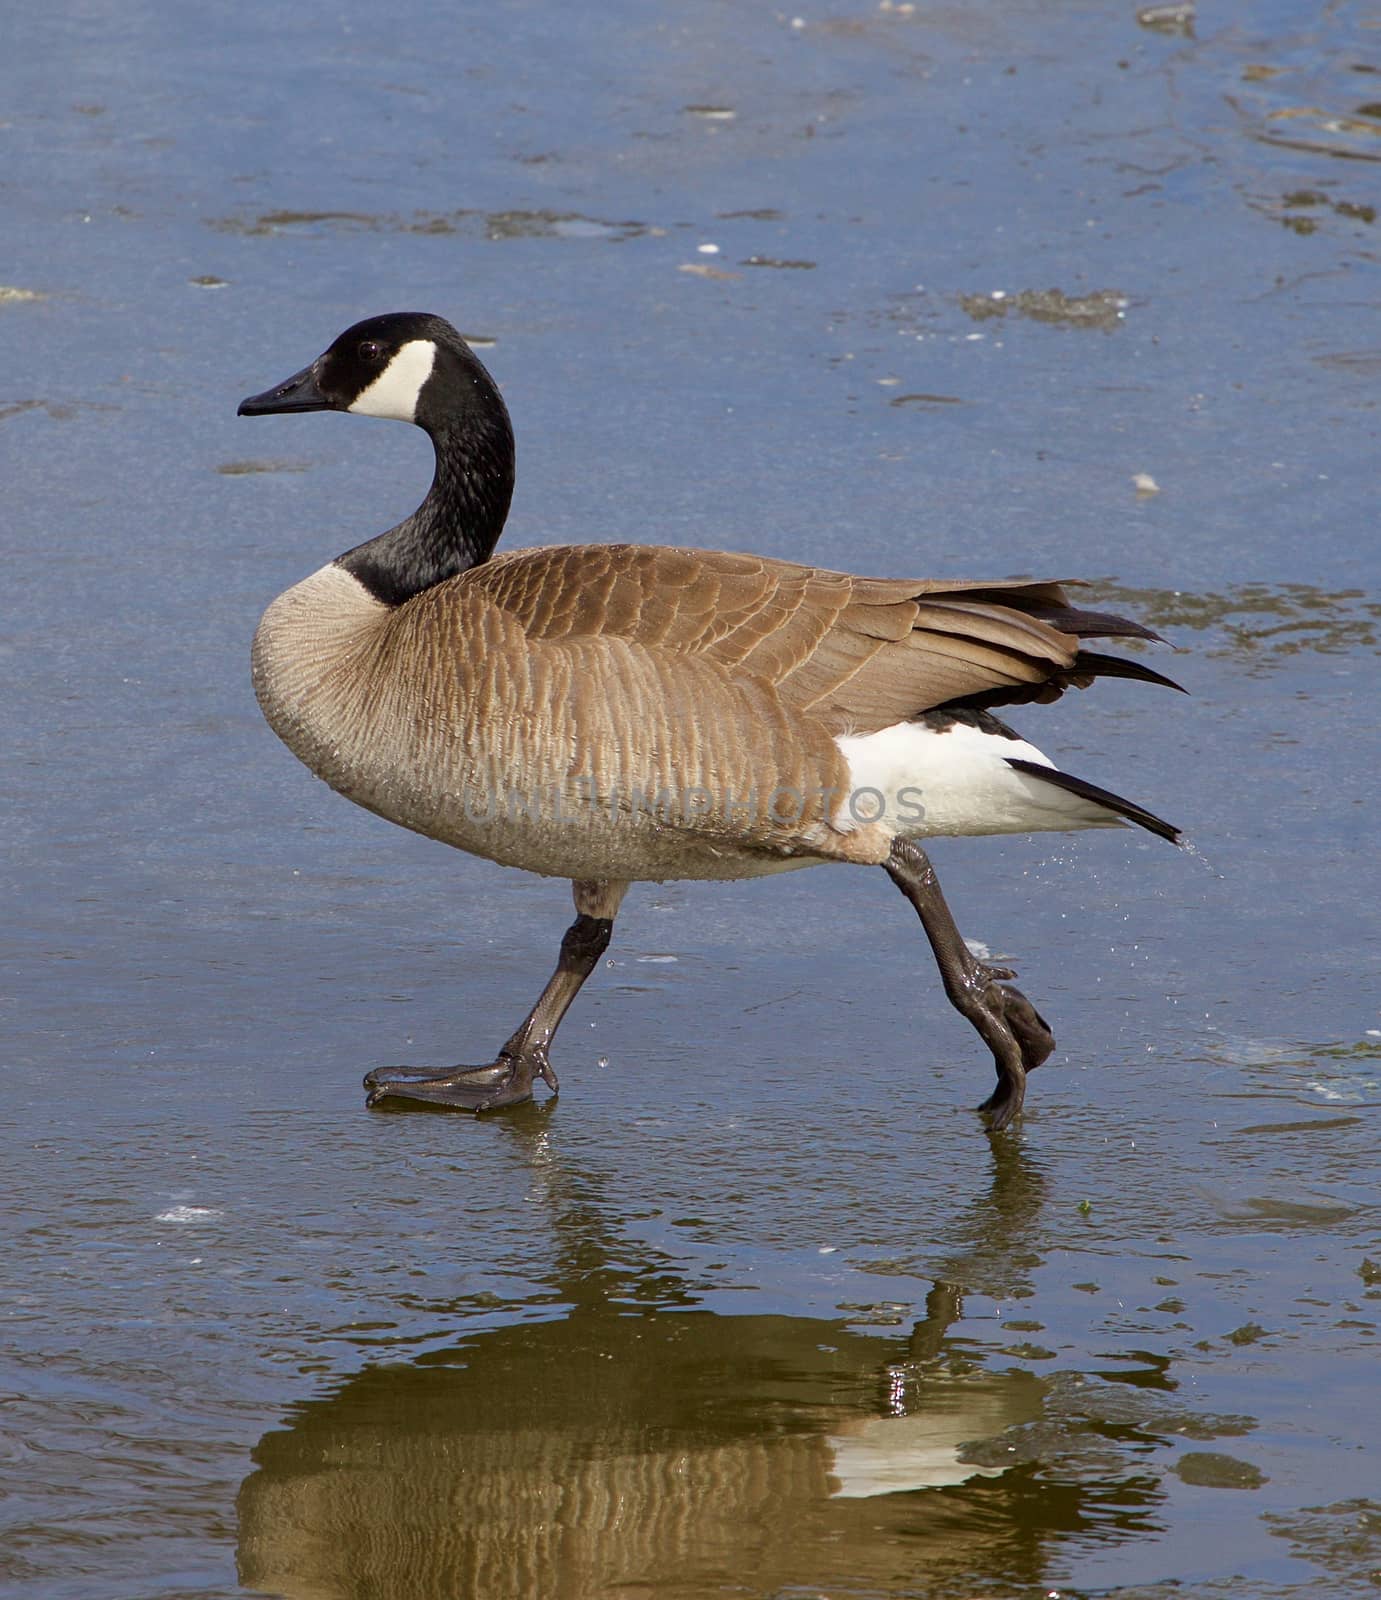 The confident walk of a cackling goose